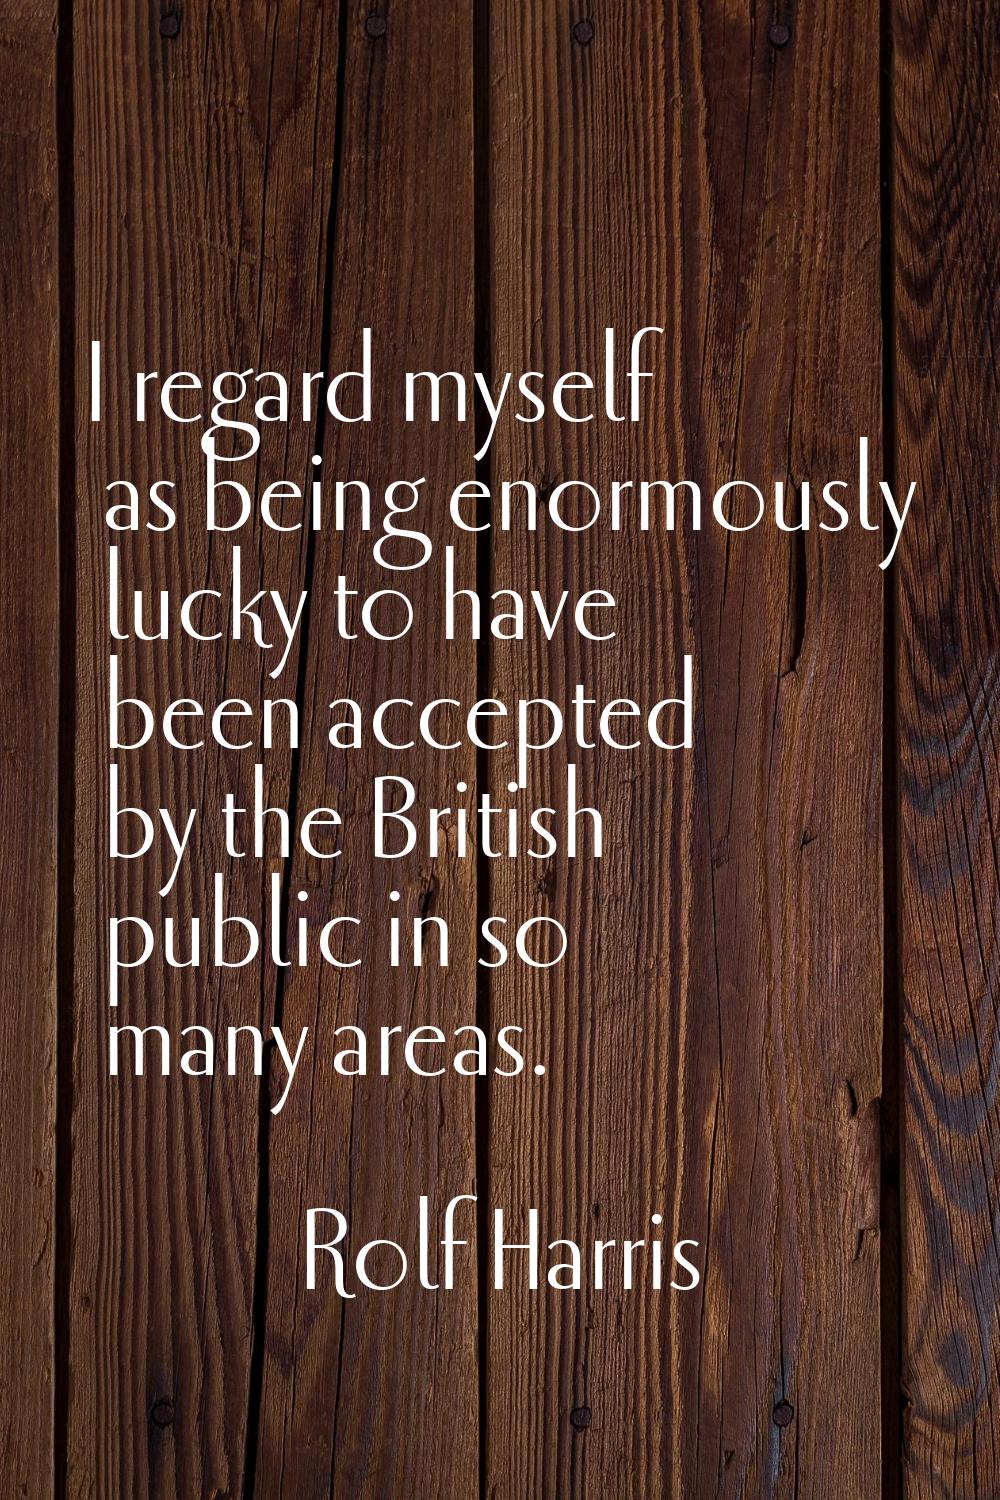 I regard myself as being enormously lucky to have been accepted by the British public in so many ar